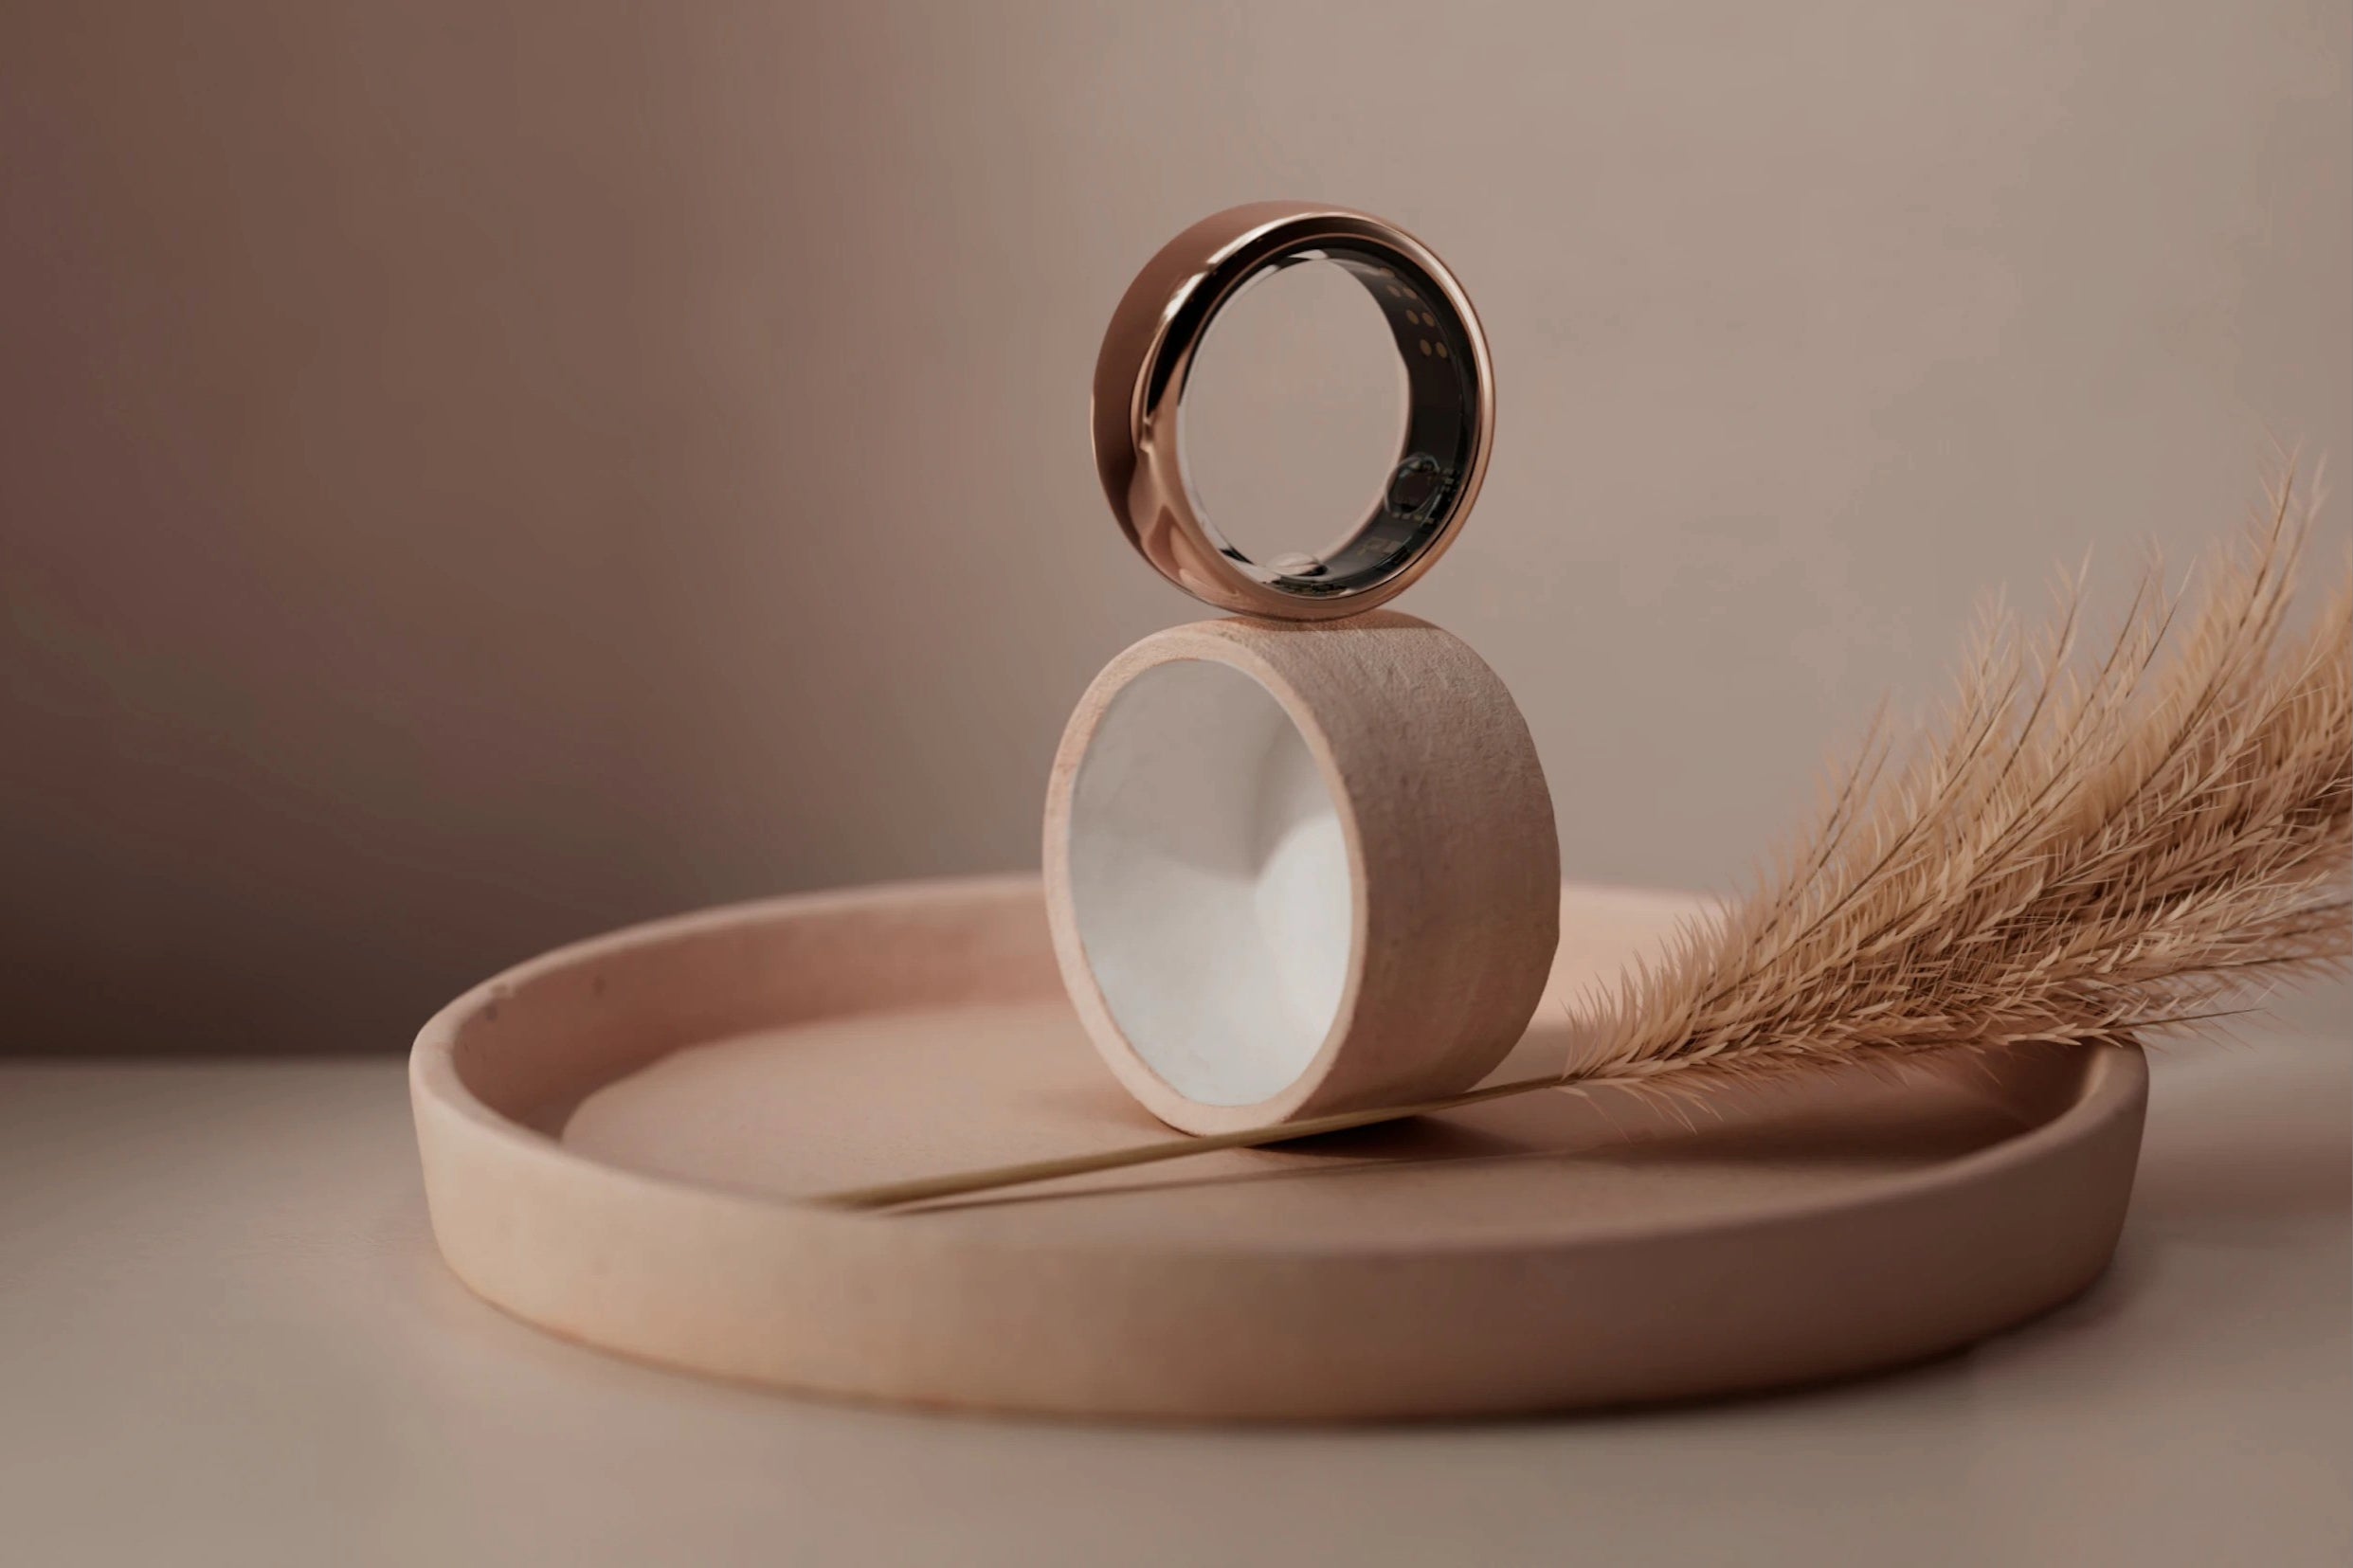 Oura ring in pink gold (Image credit – Oura) - The Galaxy ring: the new must-have gadget or another gadget from the ecosystem?